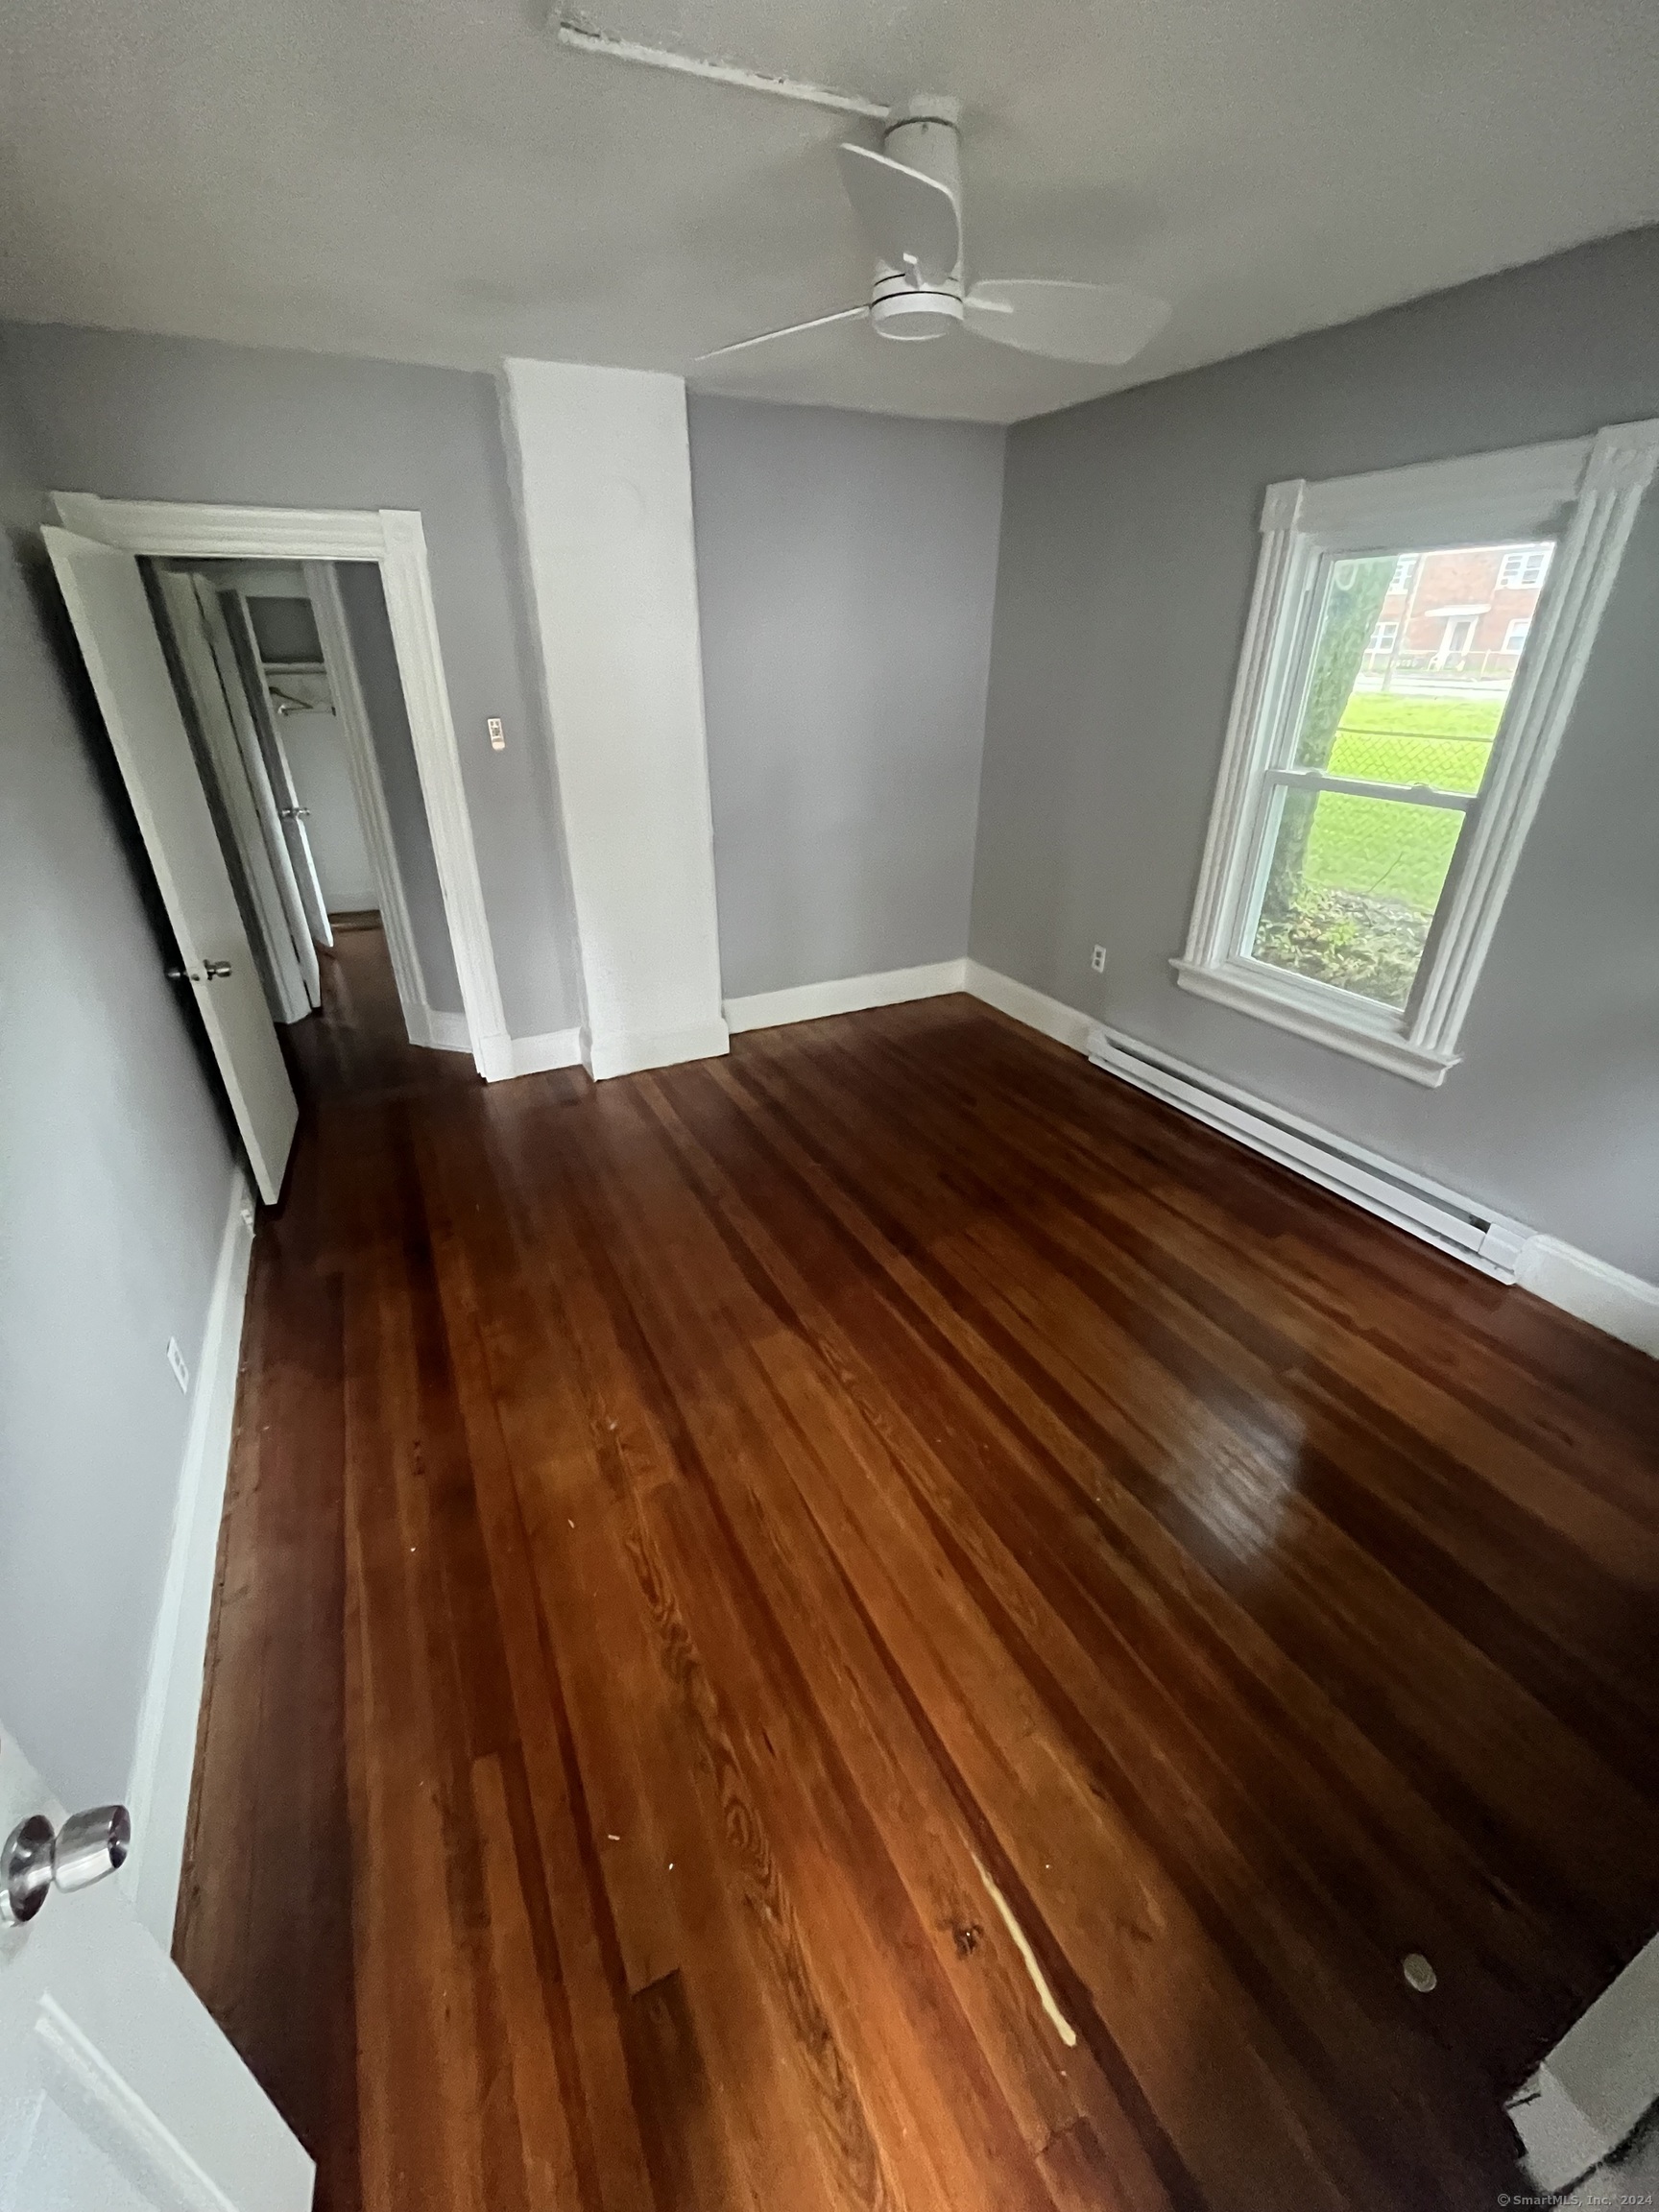 Rental Property at 91 Birch Street, Manchester, Connecticut - Bedrooms: 2 
Bathrooms: 1 
Rooms: 4  - $1,600 MO.